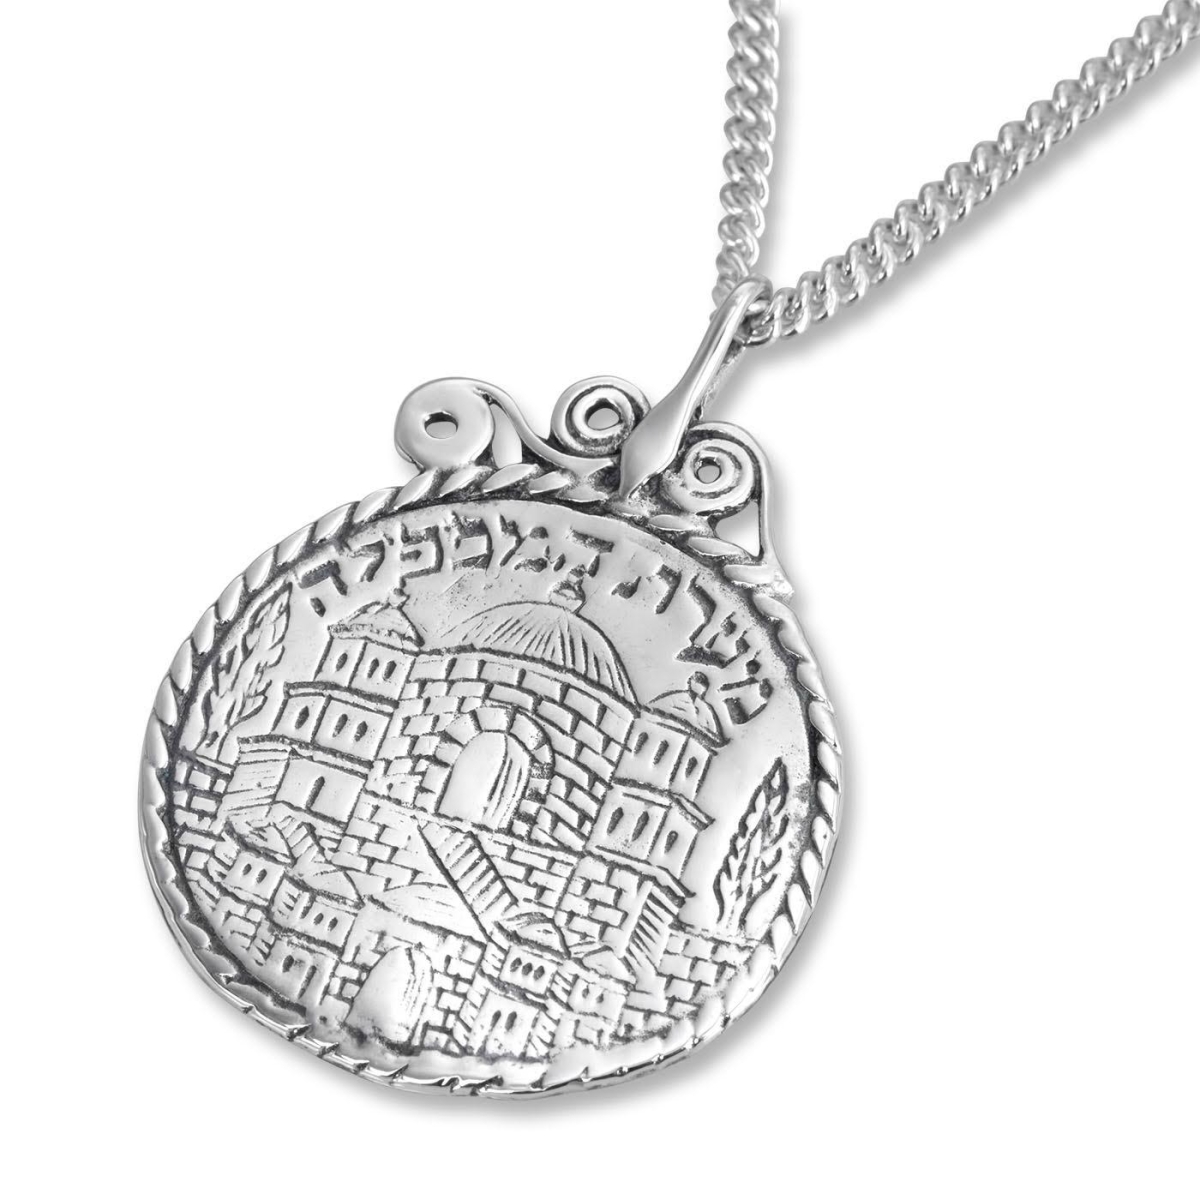  Silver Amulet-pendant with the Cave of the Machpelah. Eretz-Israel, 19th Century - 1